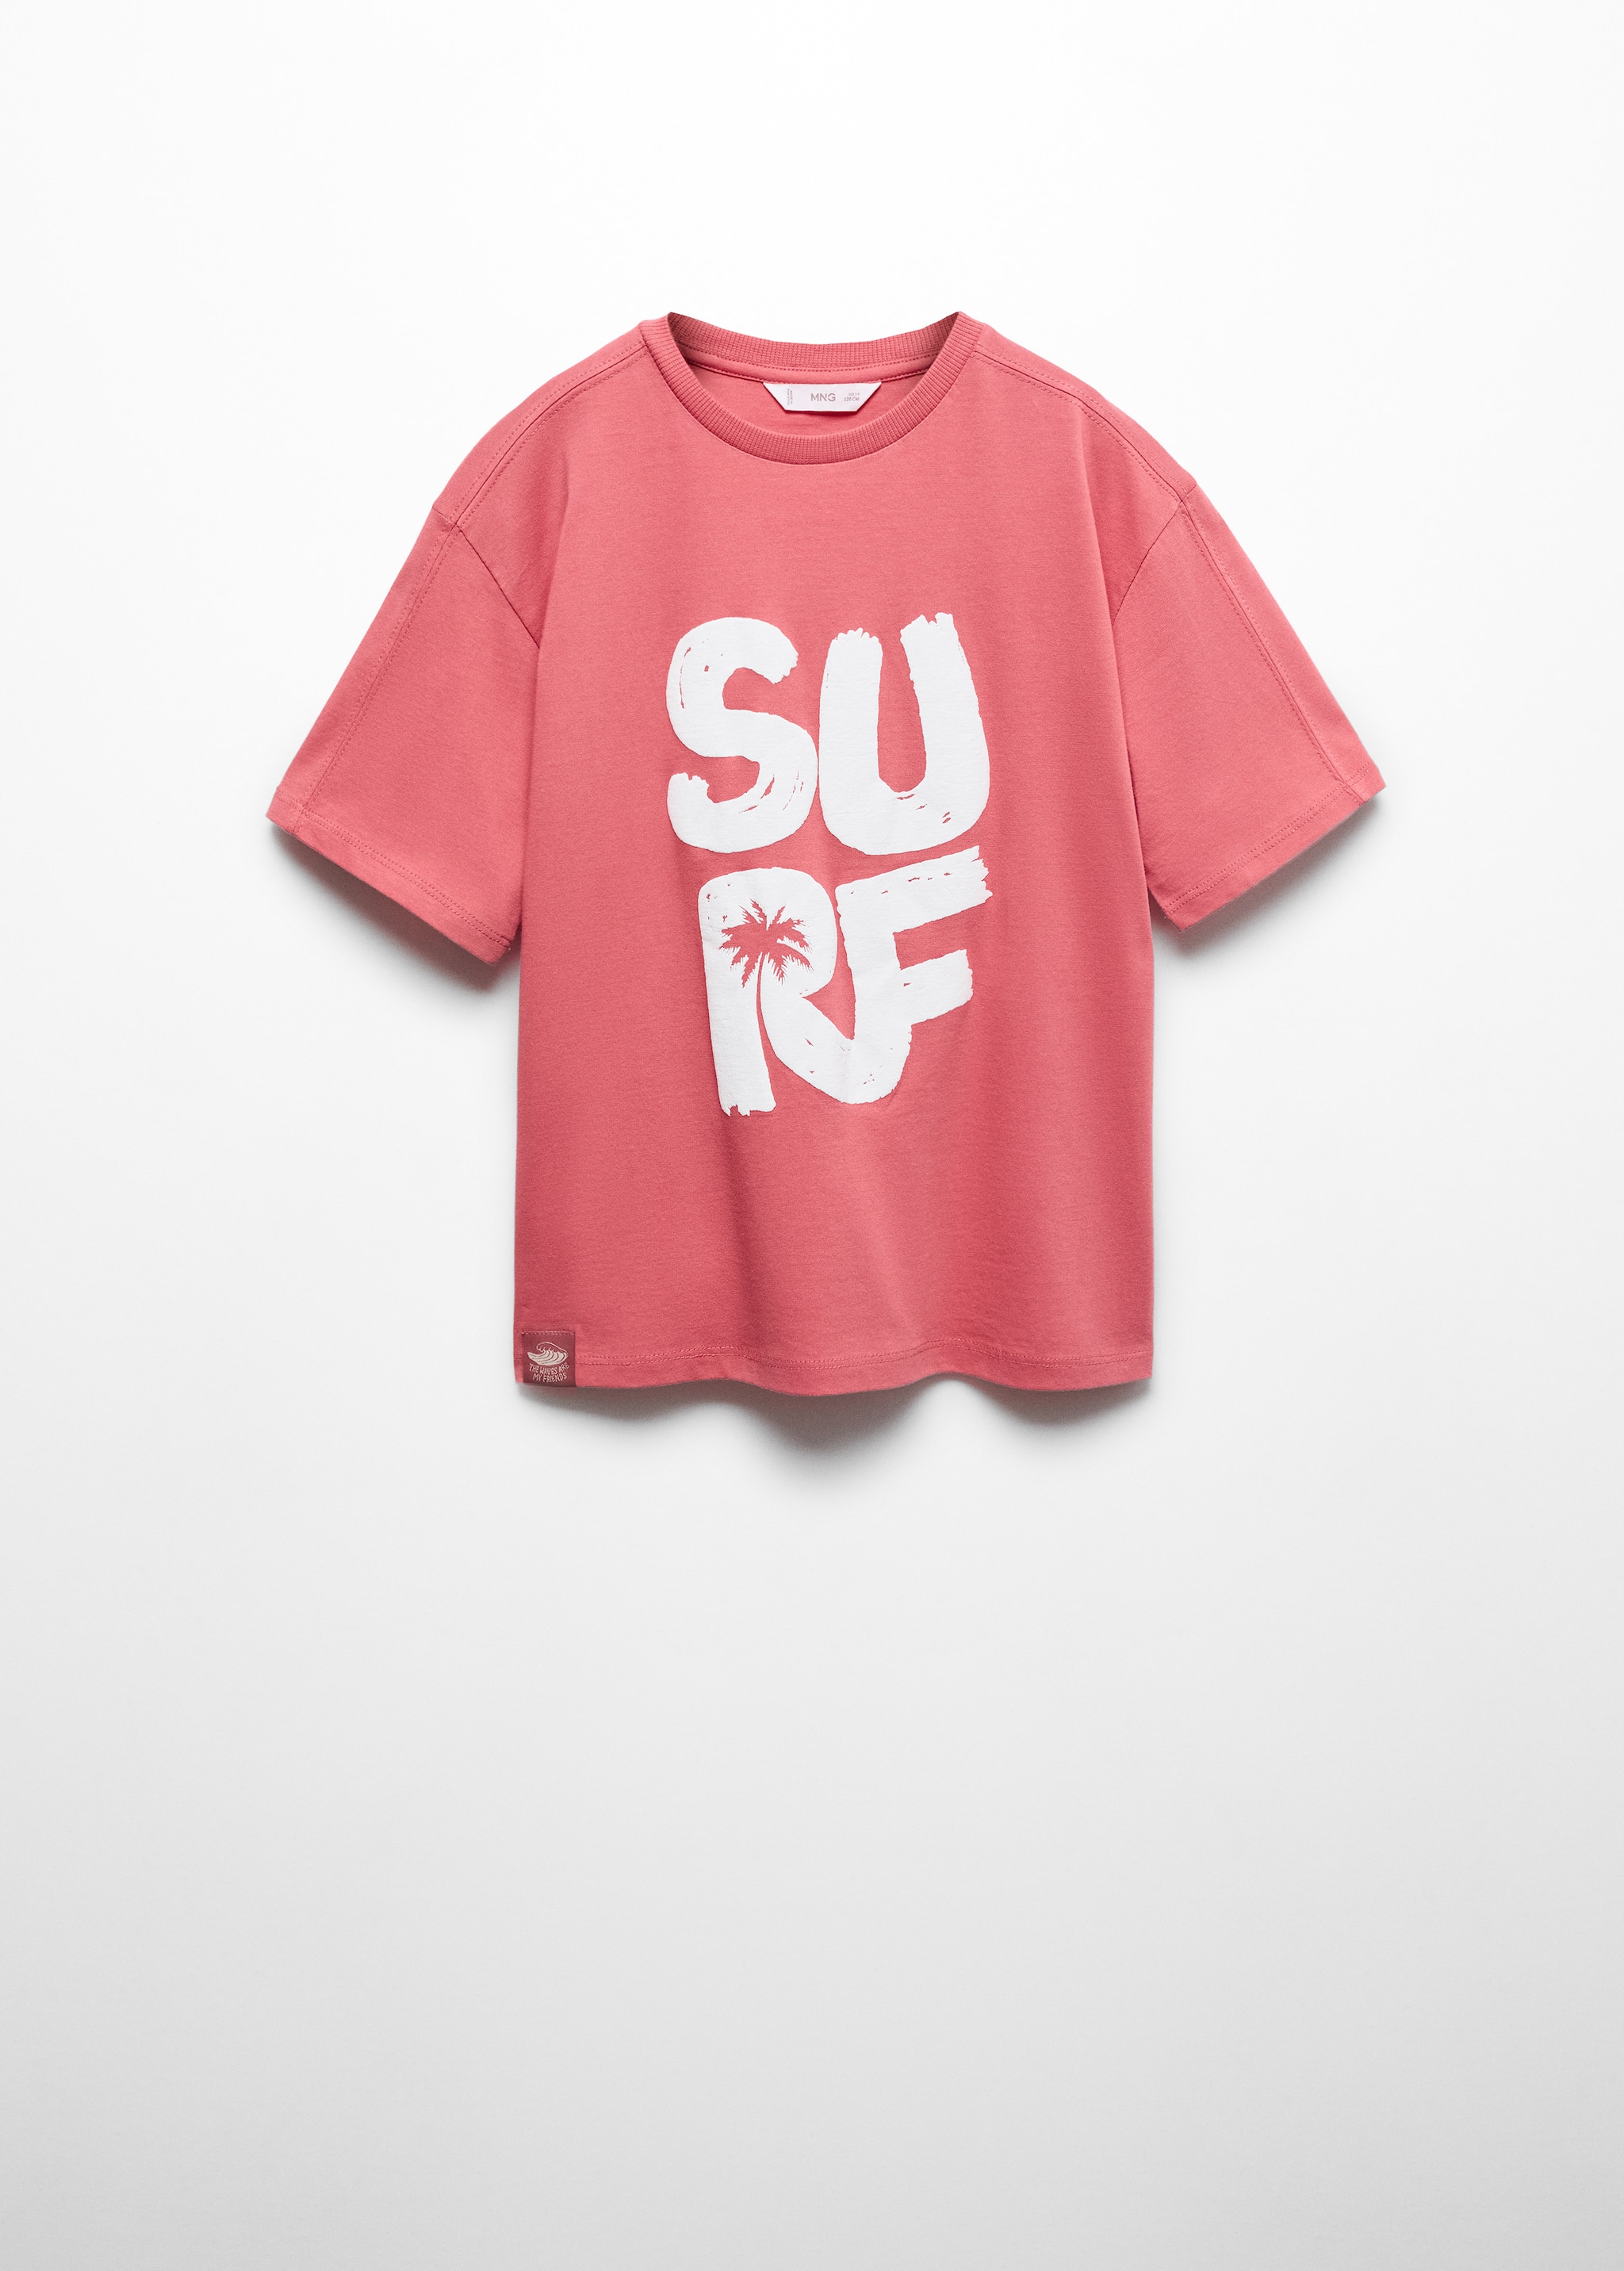 Surf printed t-shirt - Article without model